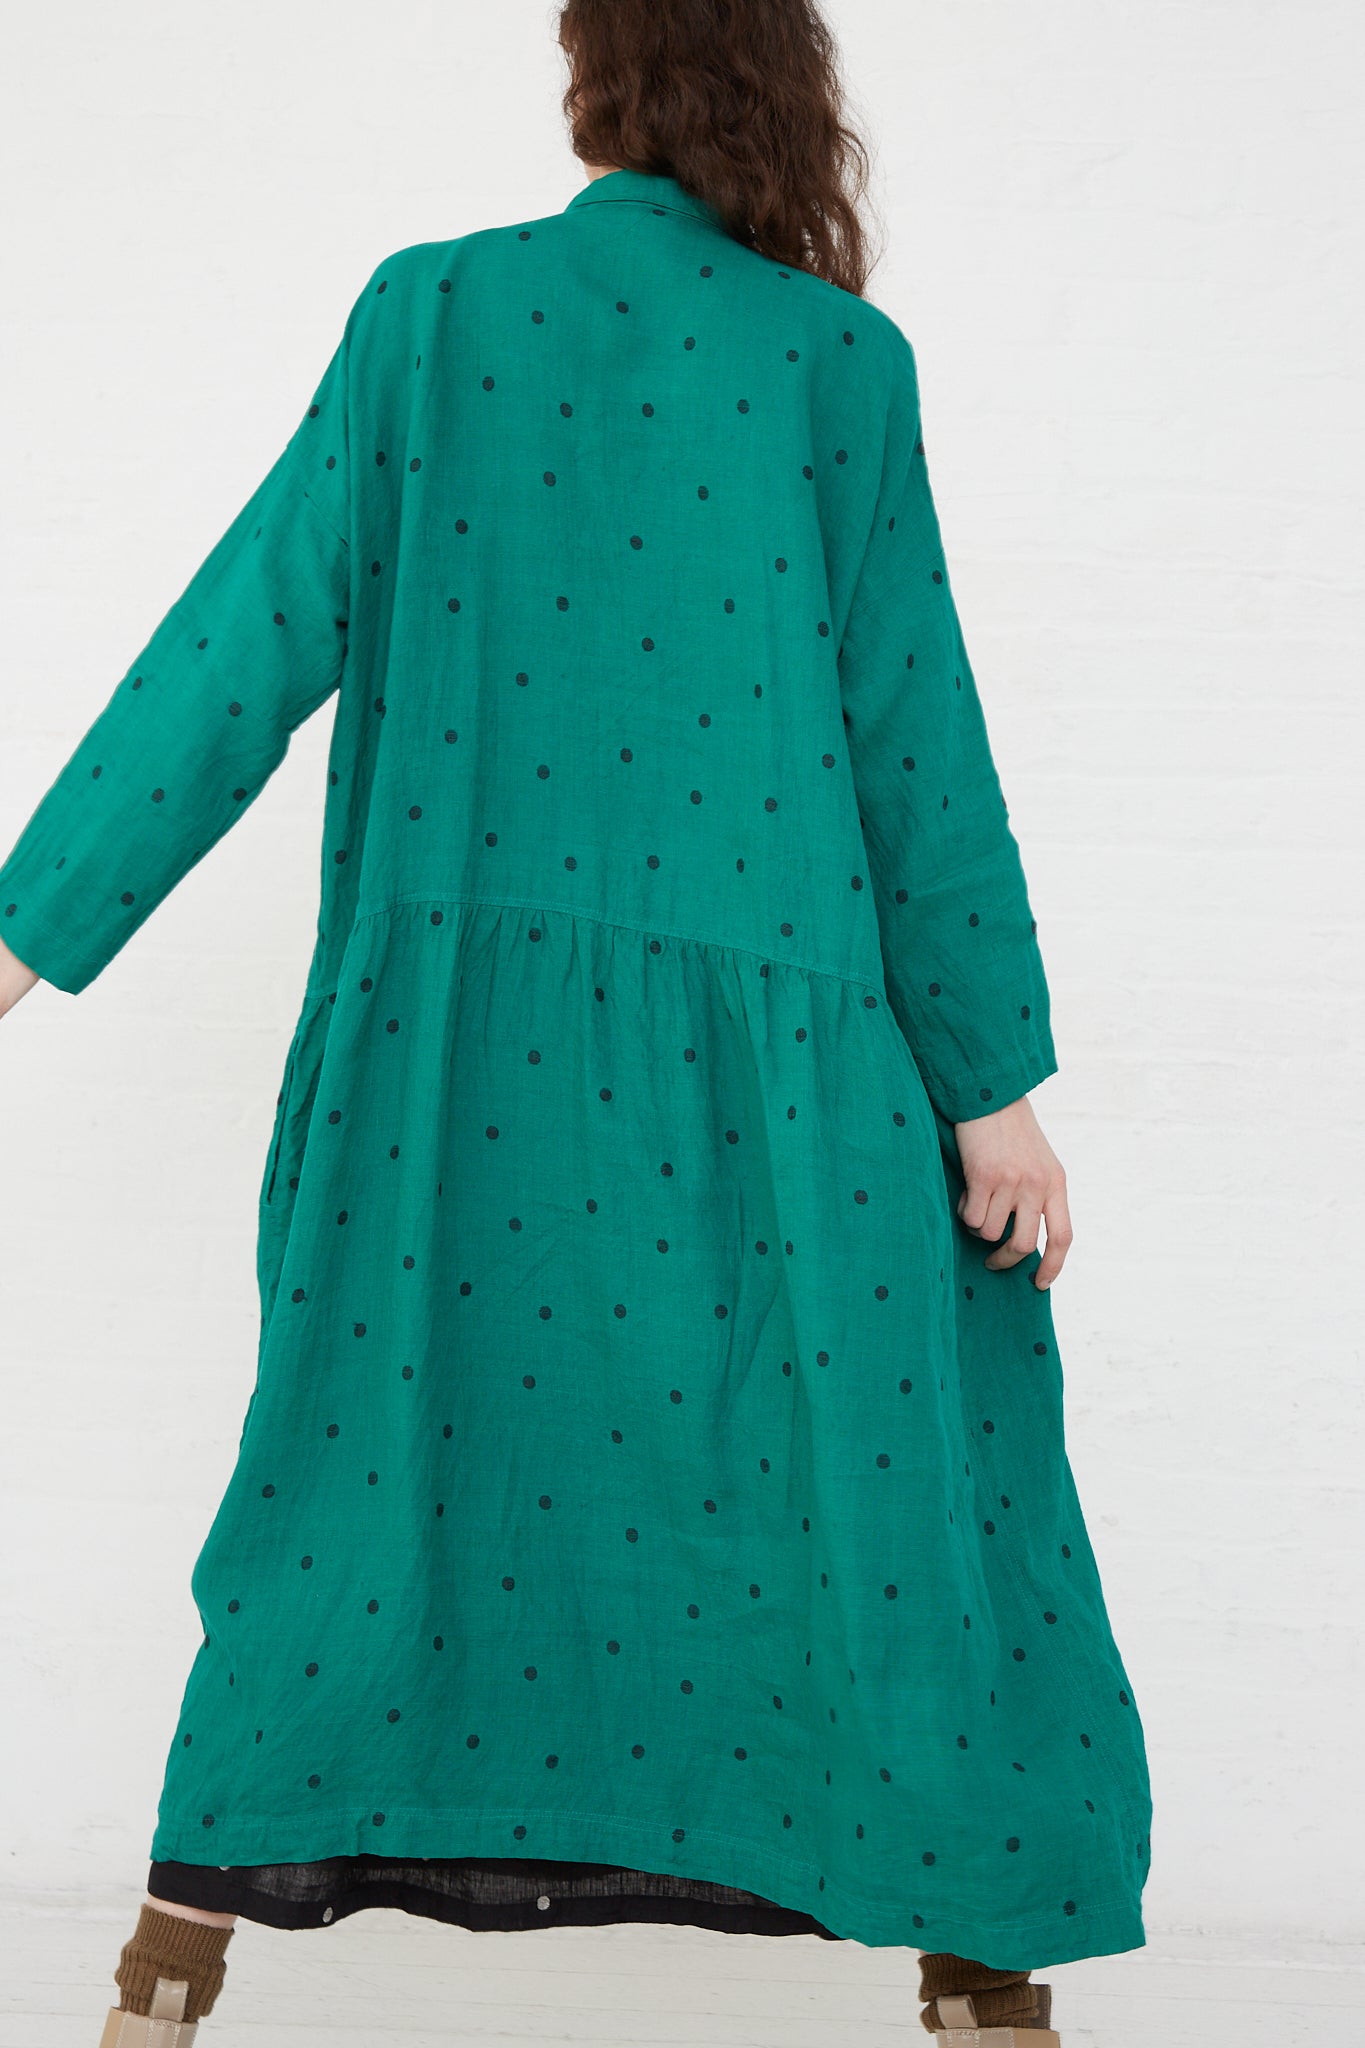 The back of a woman wearing an Ichi Antiquités Linen Dot Dress in Green and Black, gathering at the waist.